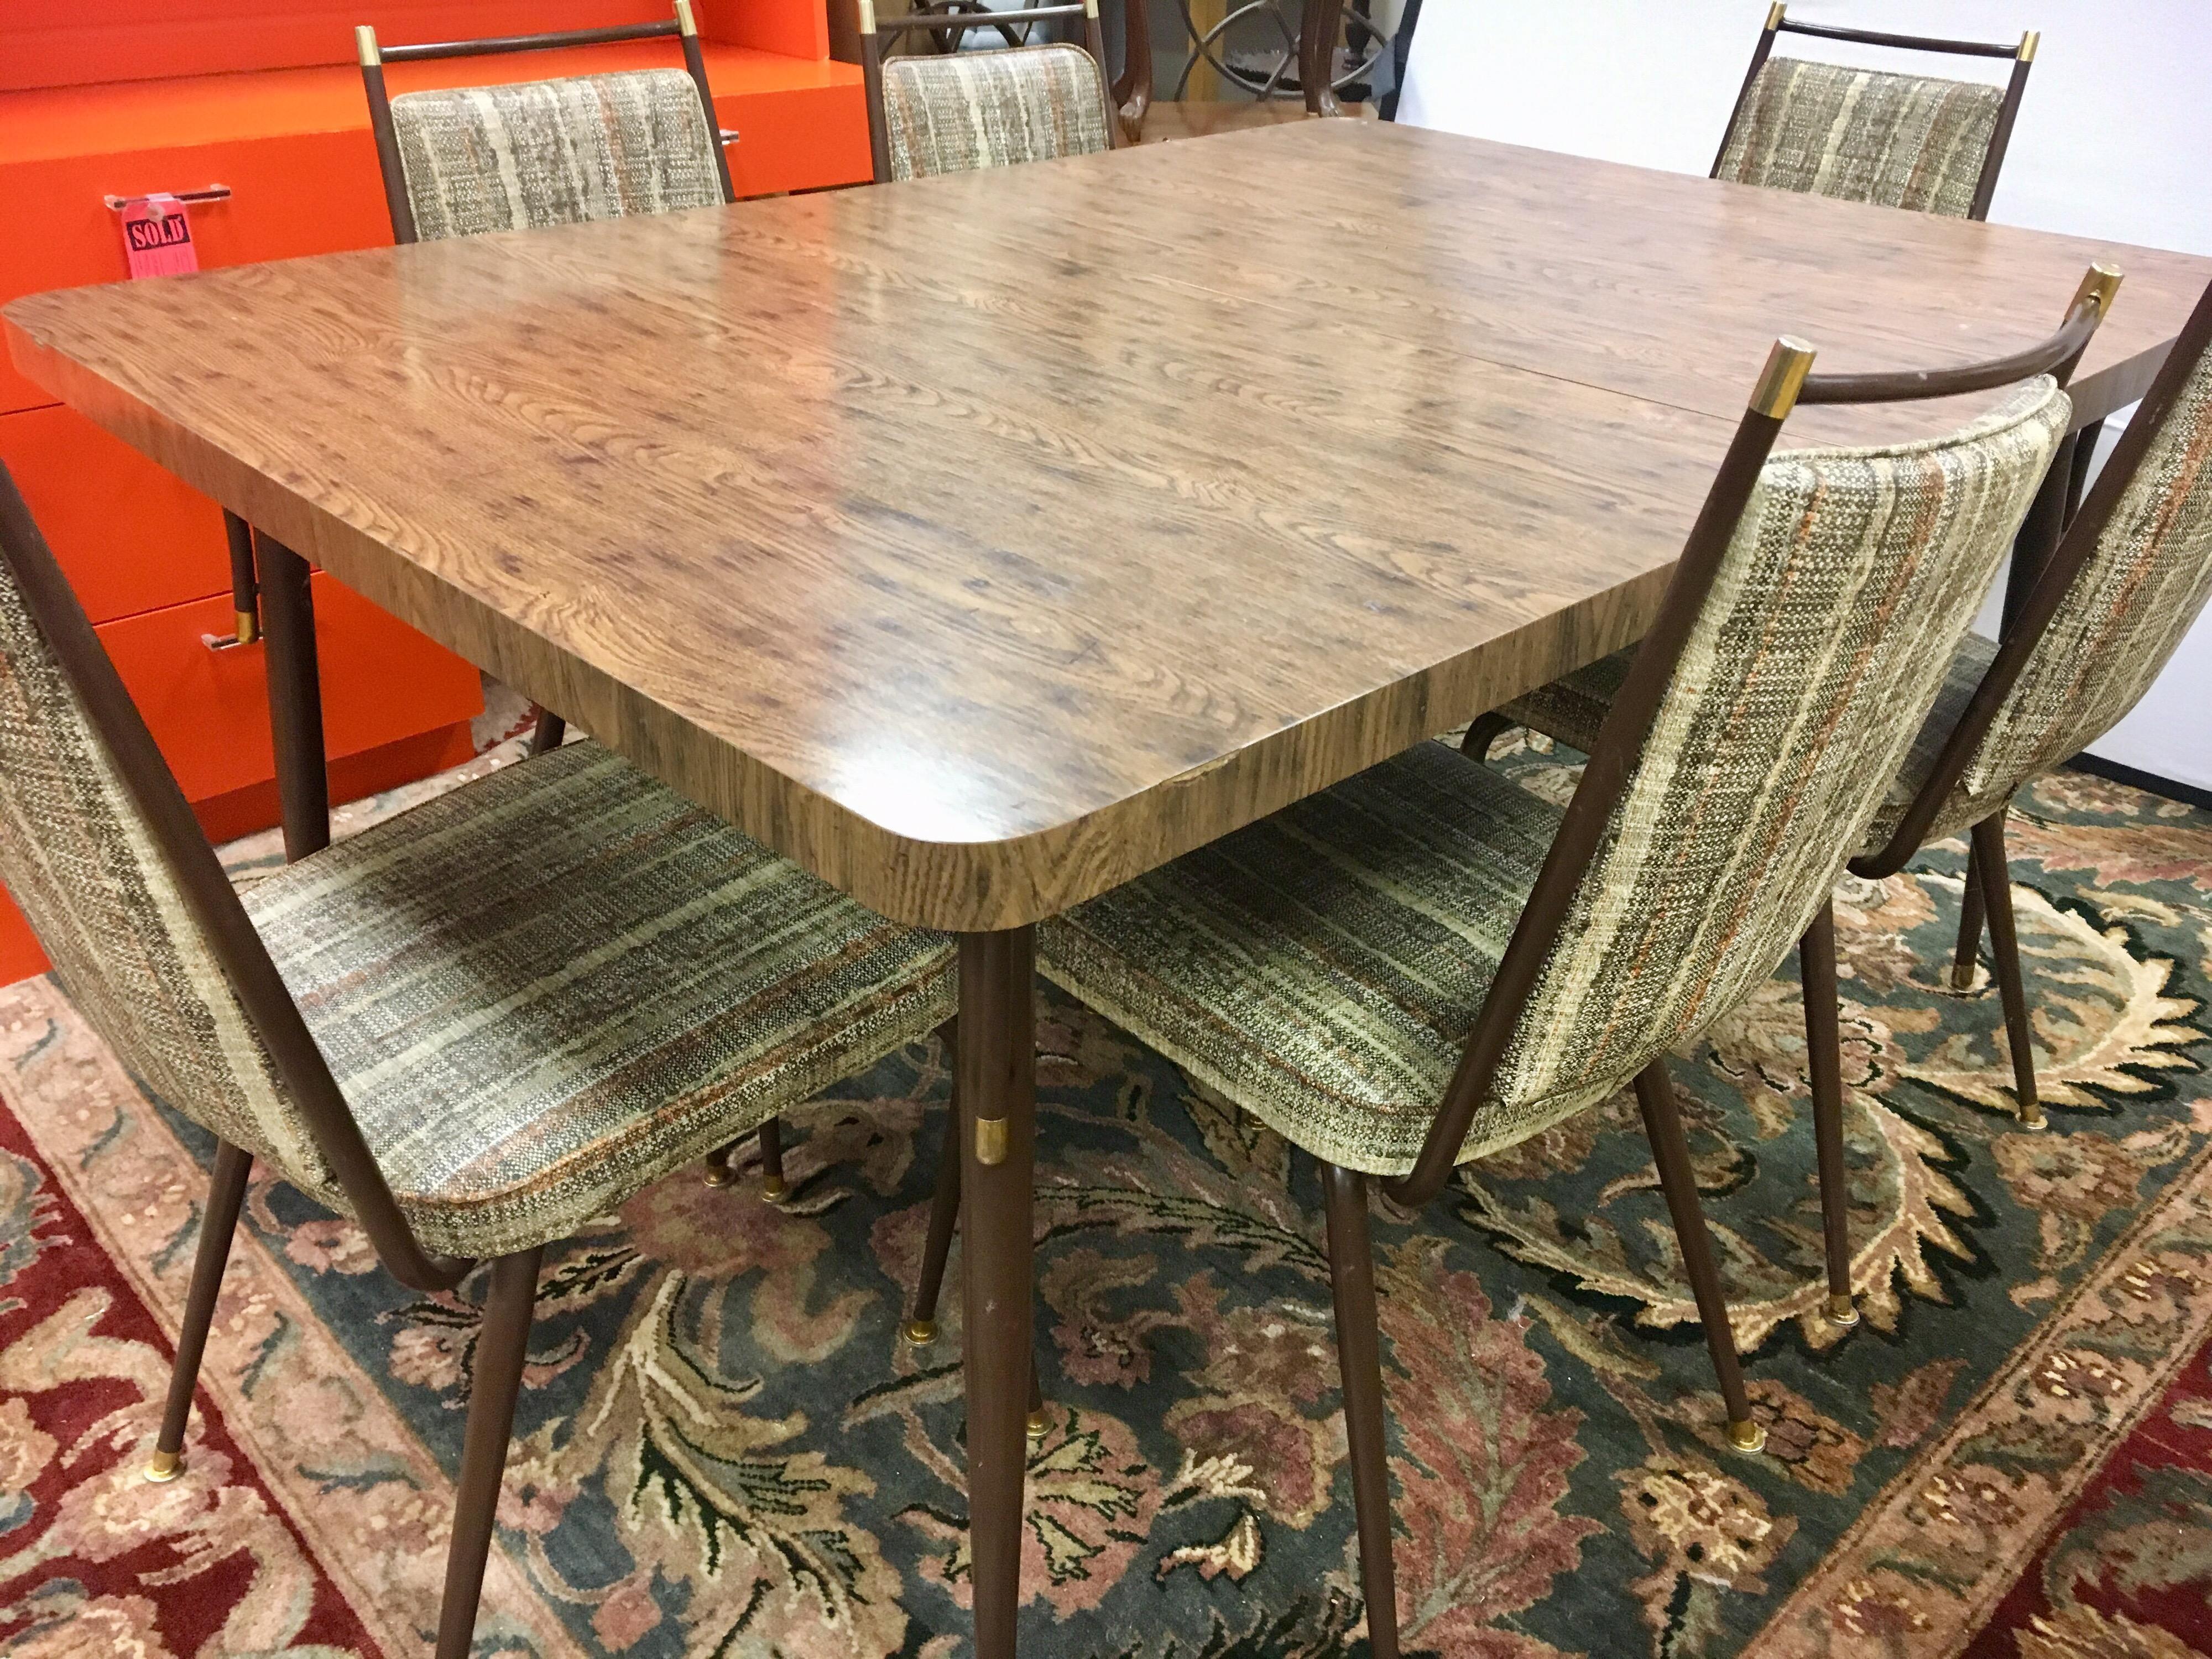 Iconic Daystrom furniture 1974 set dining room or kitchen set which includes matching table and seven chairs. The table is sixty inches long as shown but also comes with one ten inch leaf to expand table to seventy inches. There are a total of seven